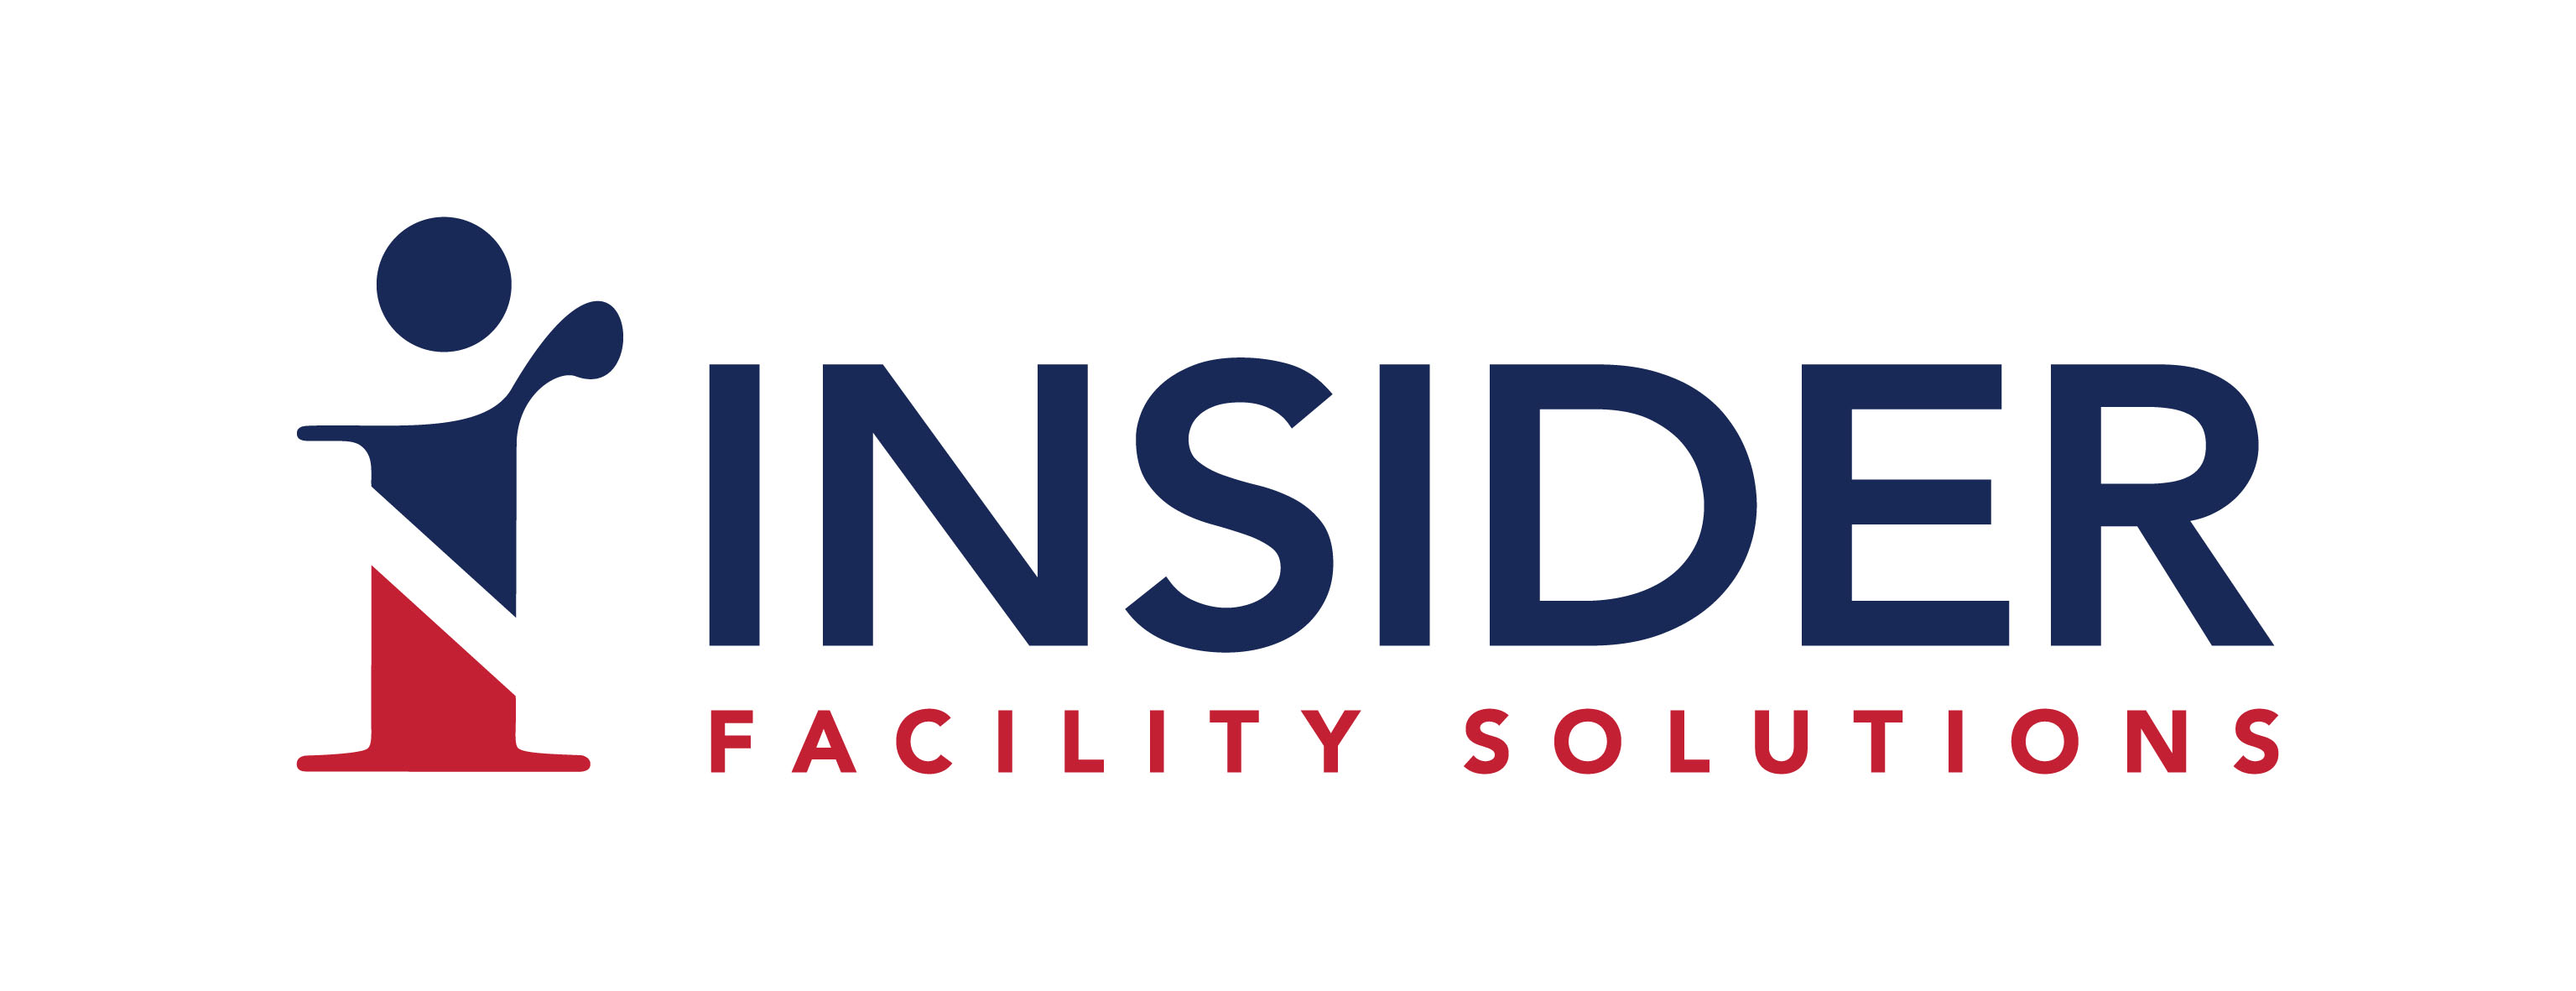 INSIDER FACILITY SOLUTIONS AS